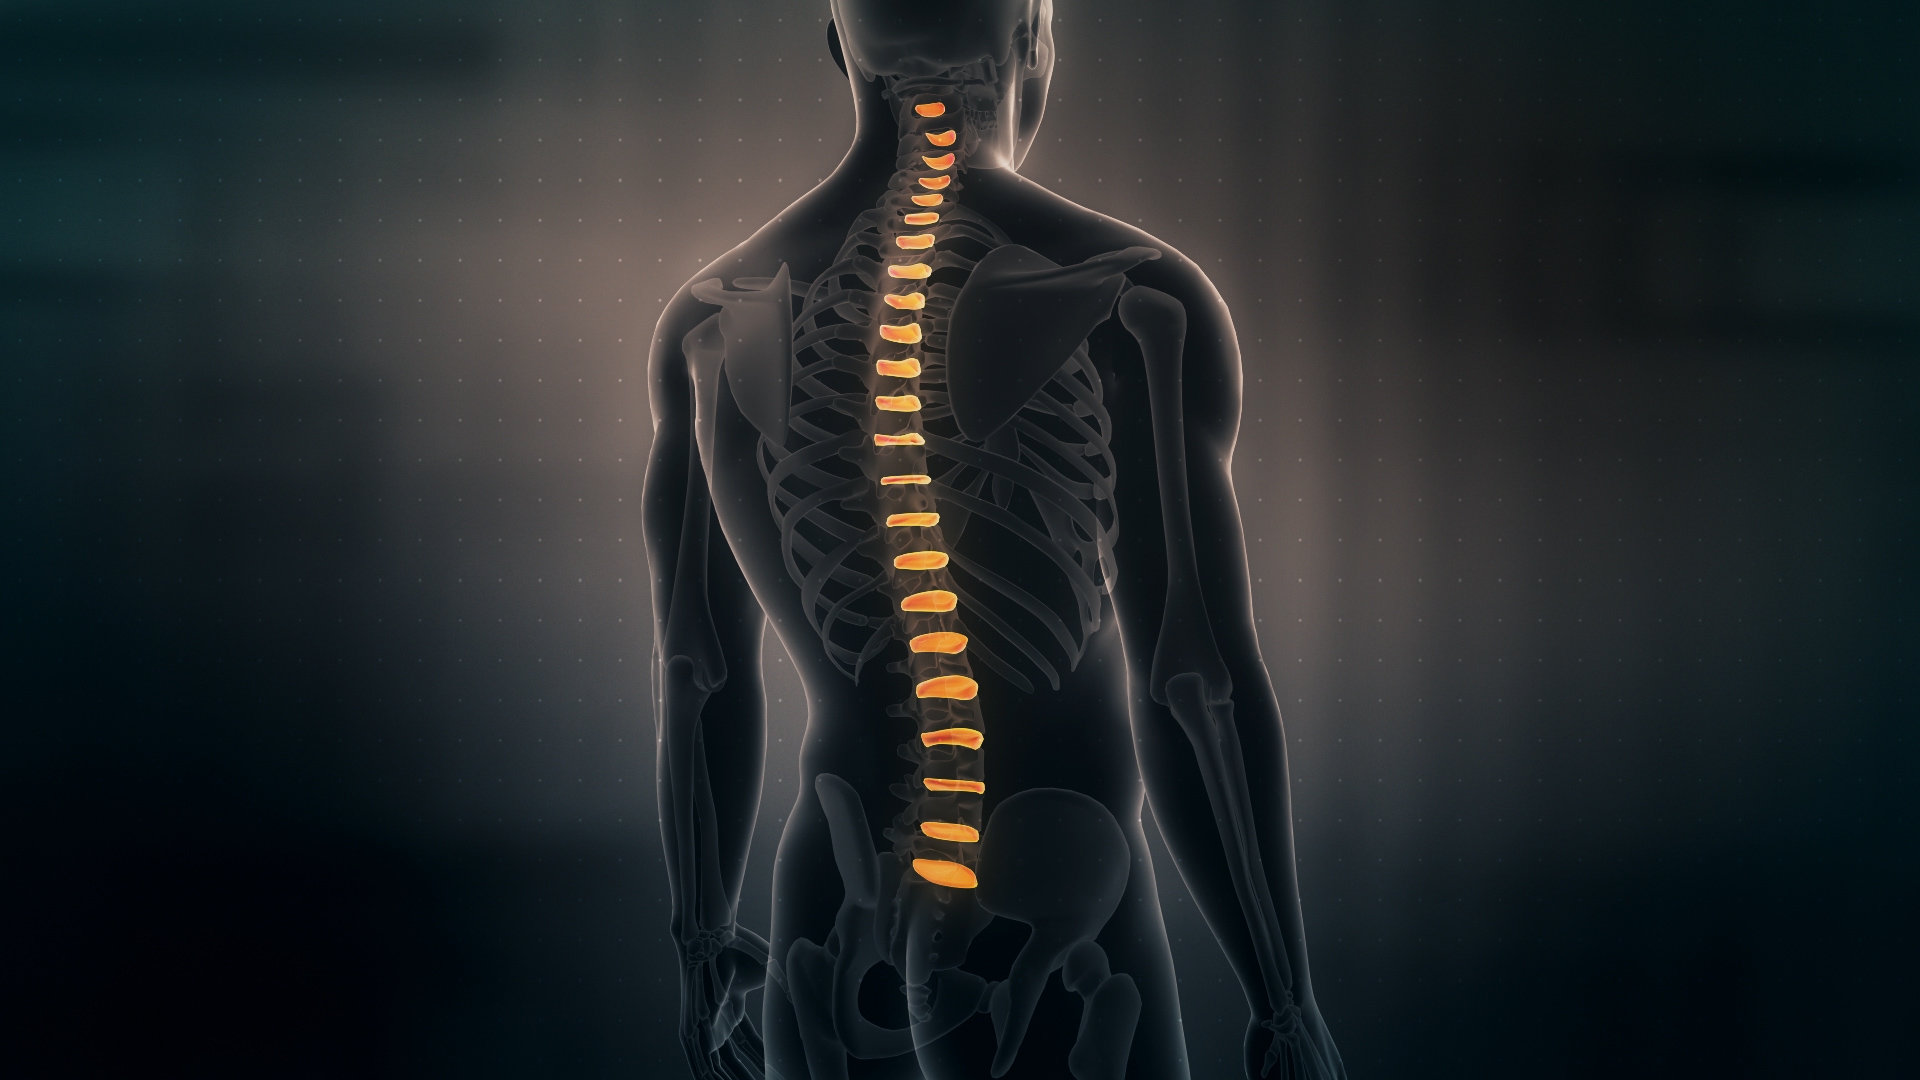 Futuristic Interface Display of Human Male Spinal Discs on dark background